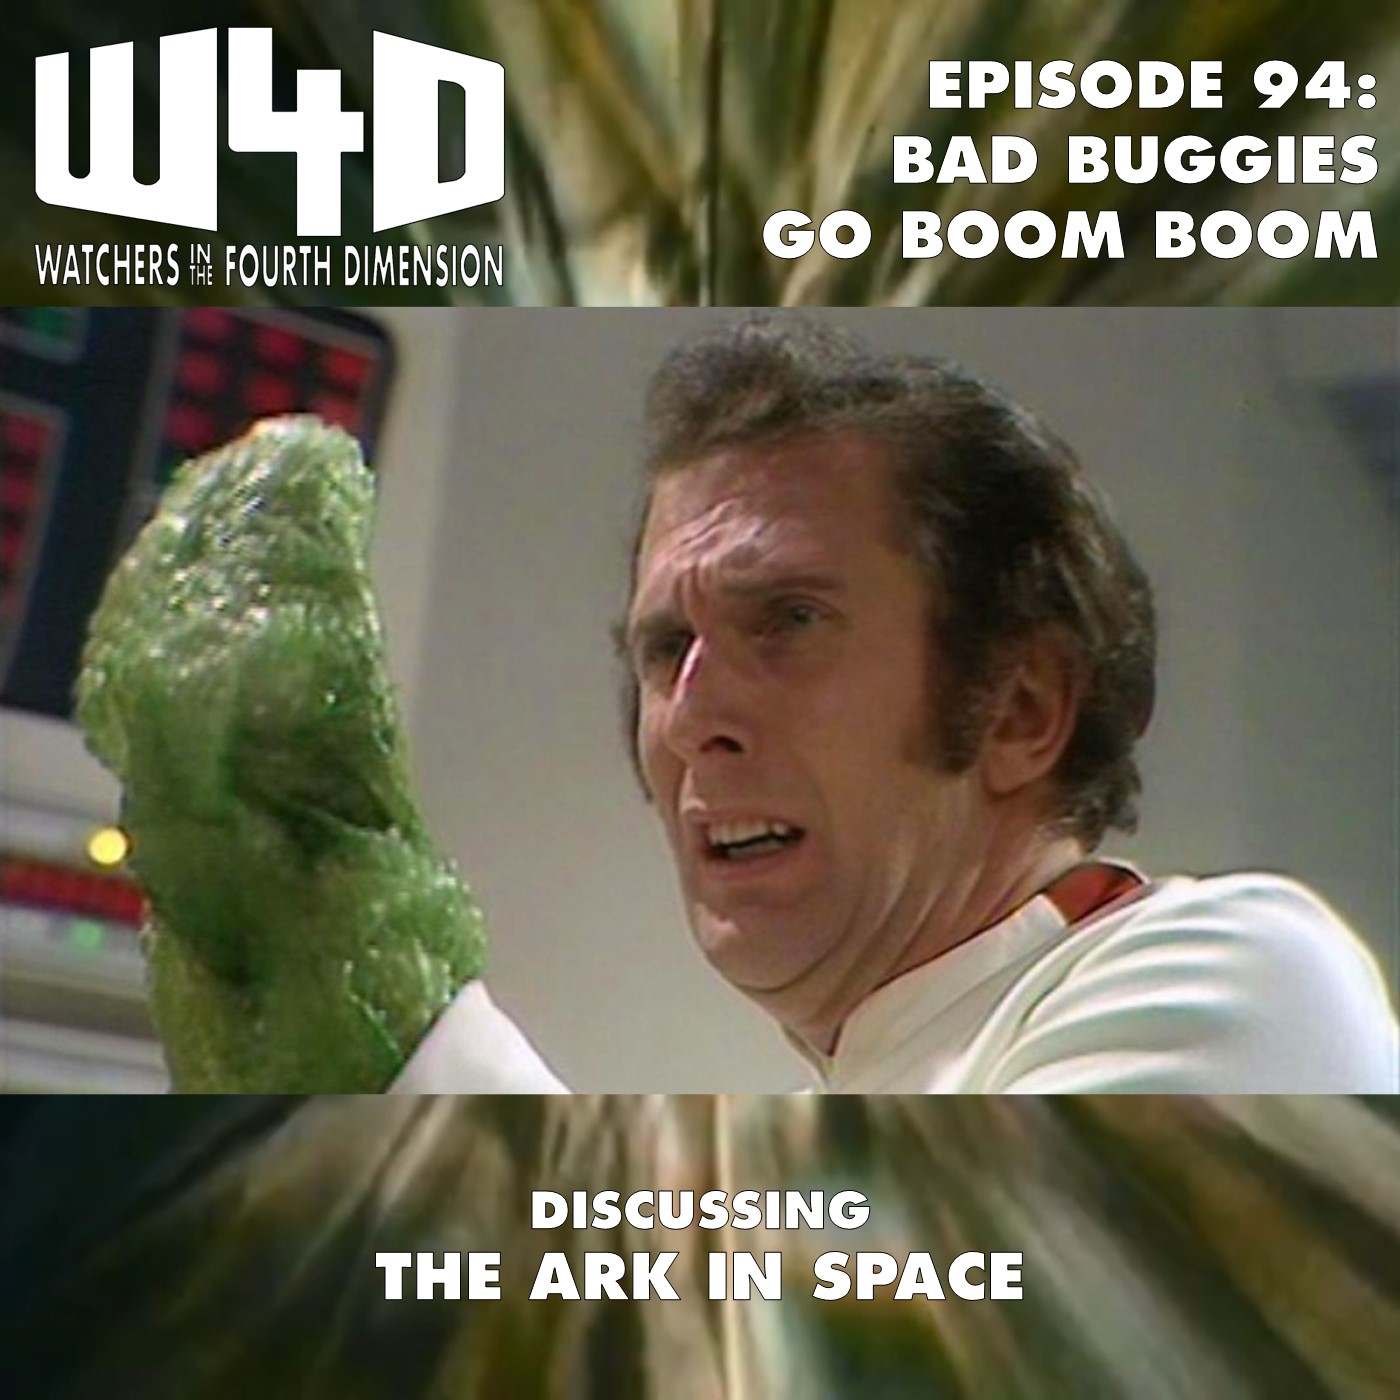 Episode 94: Bad Buggies Go Boom Boom (The Ark in Space)